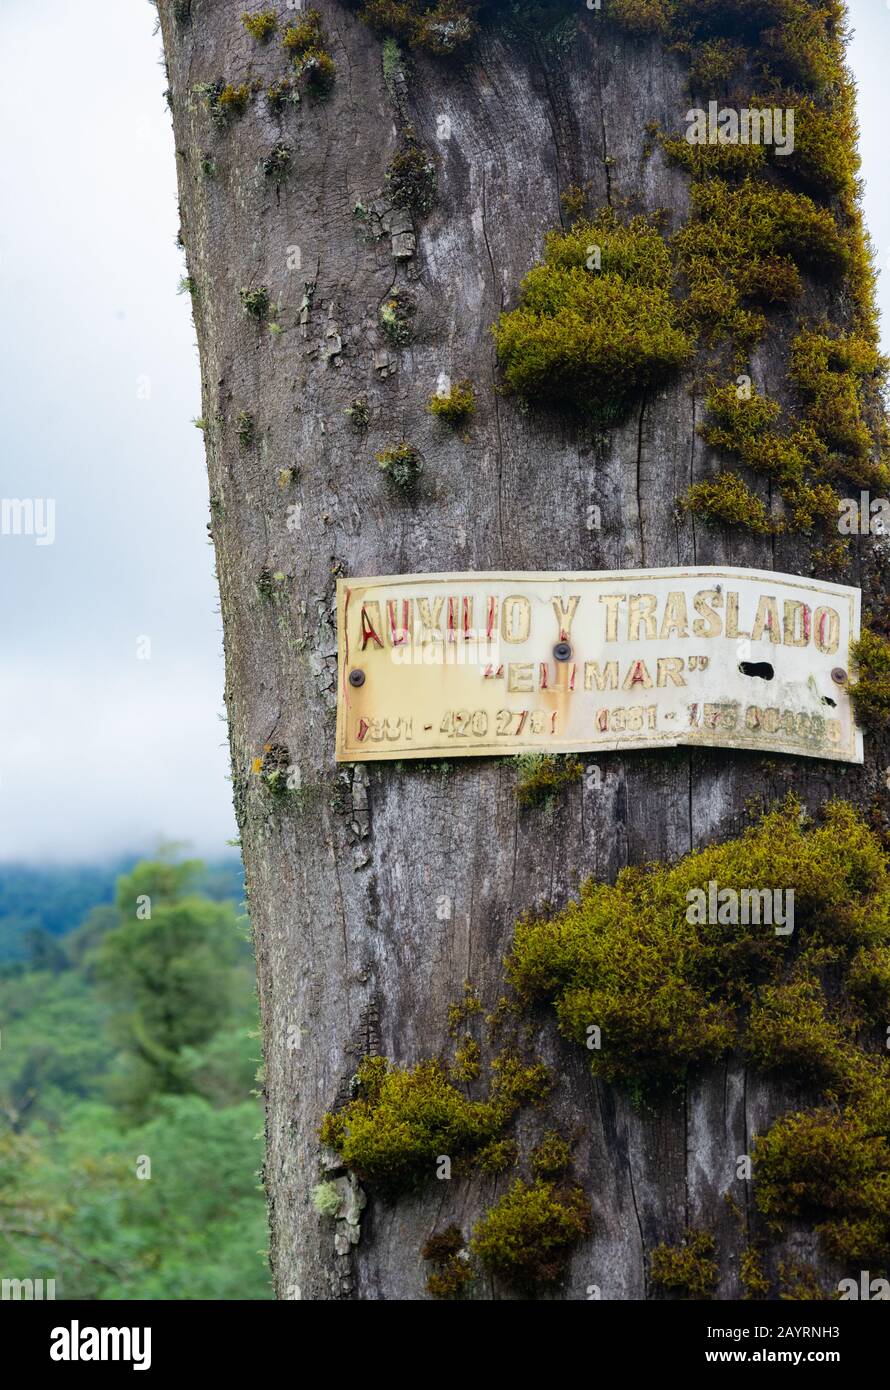 MONTEROS, TUCUMAN, ARGENTINA - MARCH 19, 2019: Old advertising sign on a tree in route 307 from San Miguel de Tucuman to Tafi del Valle. Close up. Stock Photo